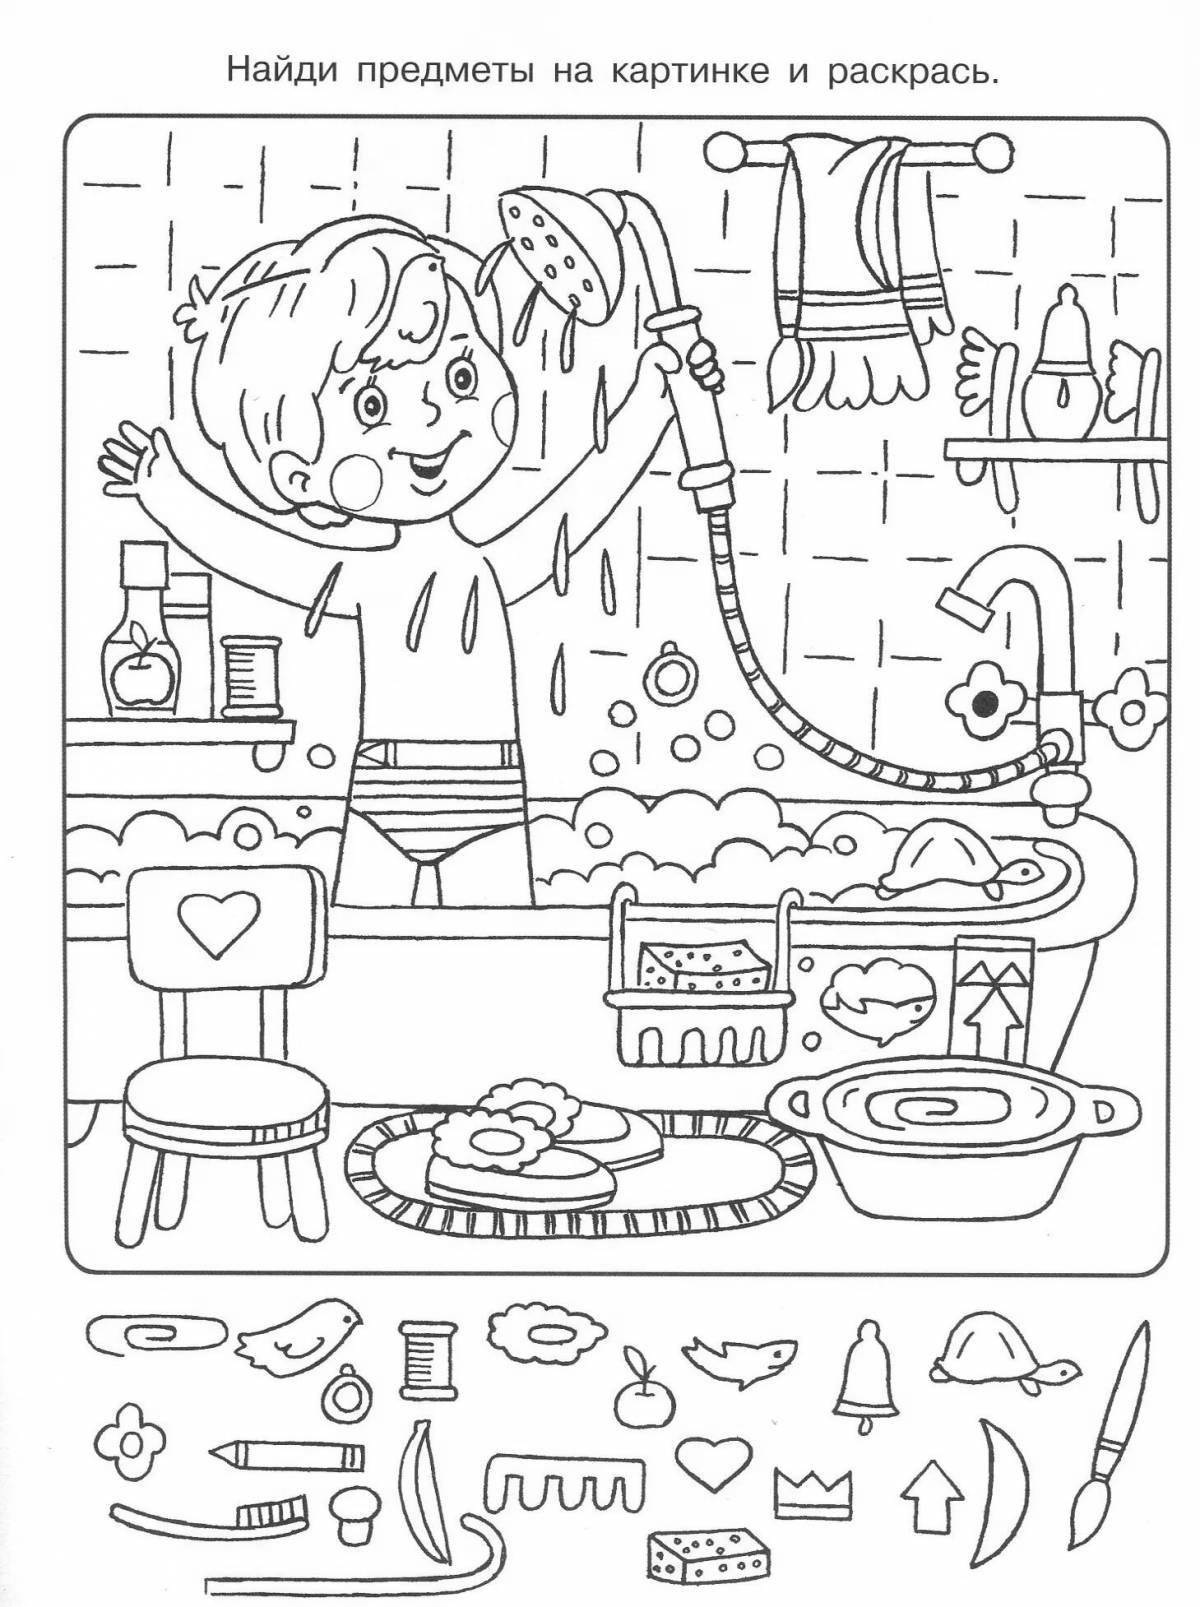 Charming coloring book for mindfulness